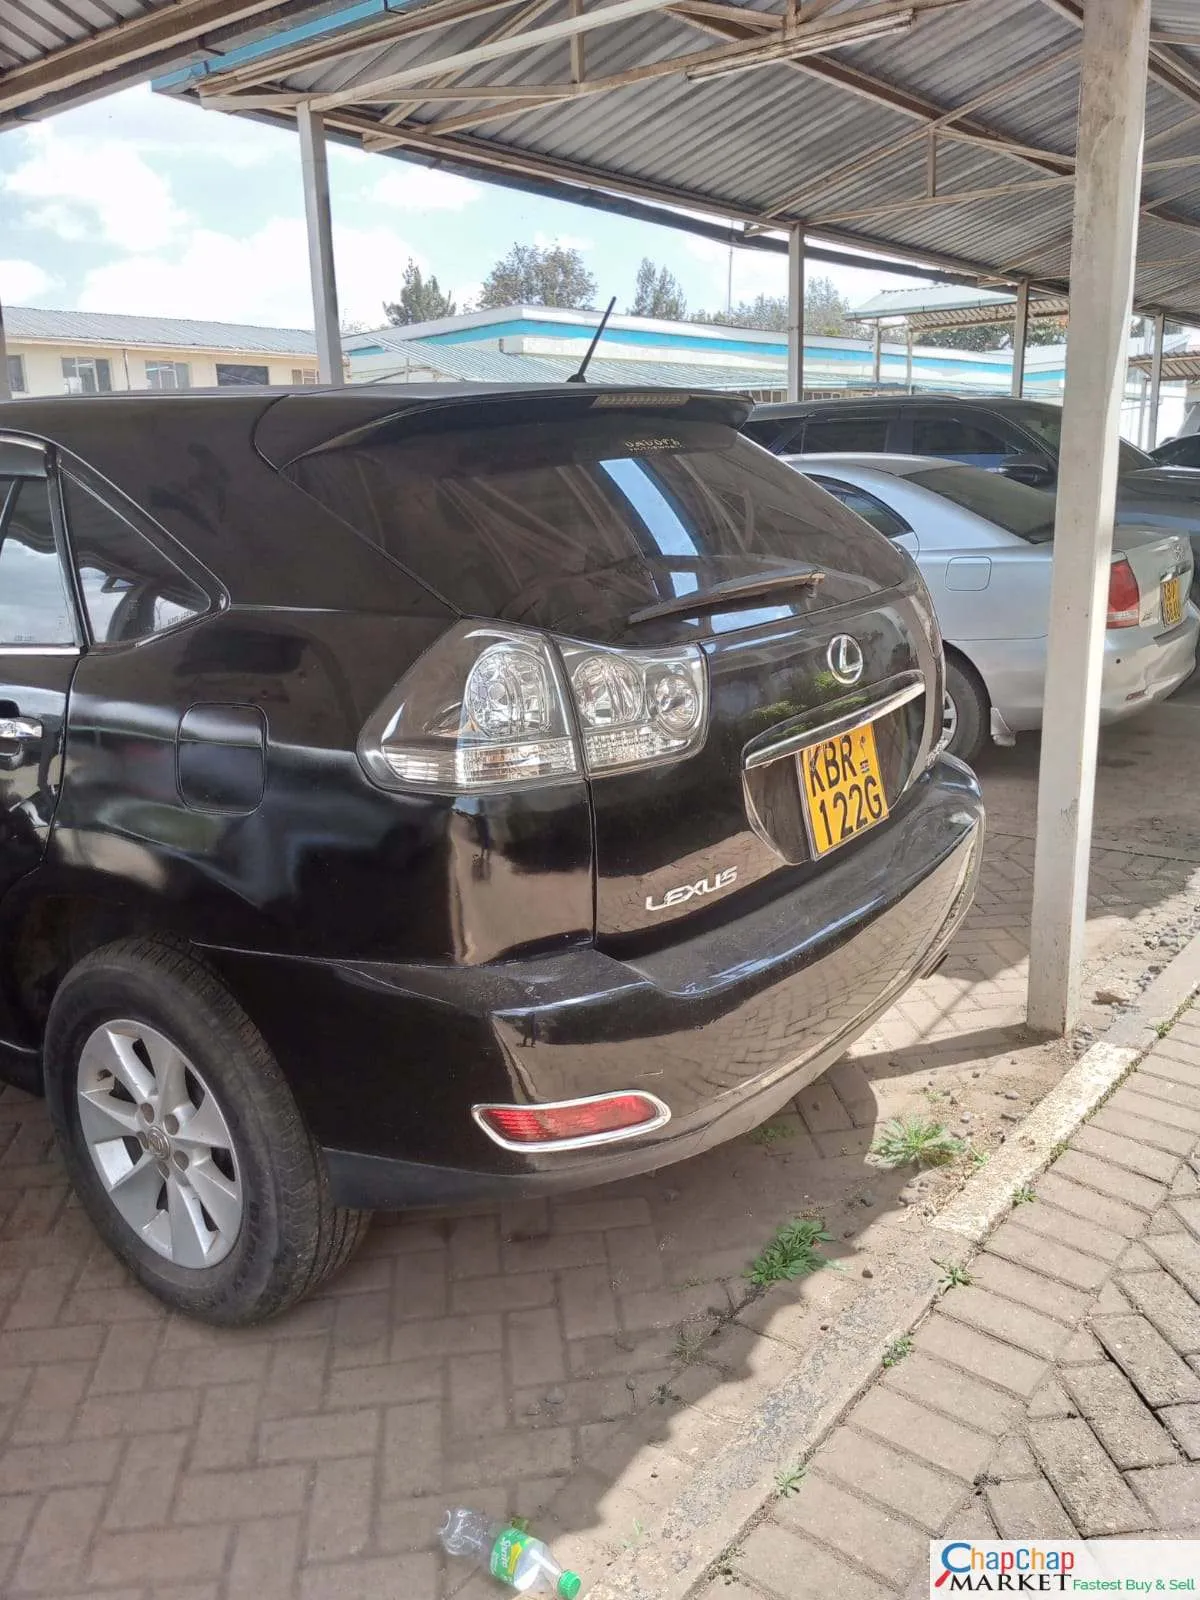 Cars Cars For Sale-Toyota Harrier Kenya You Pay 30% Deposit Trade in OK EXCLUSIVE Toyota harrier for sale in Kenya hire purchase installments 8